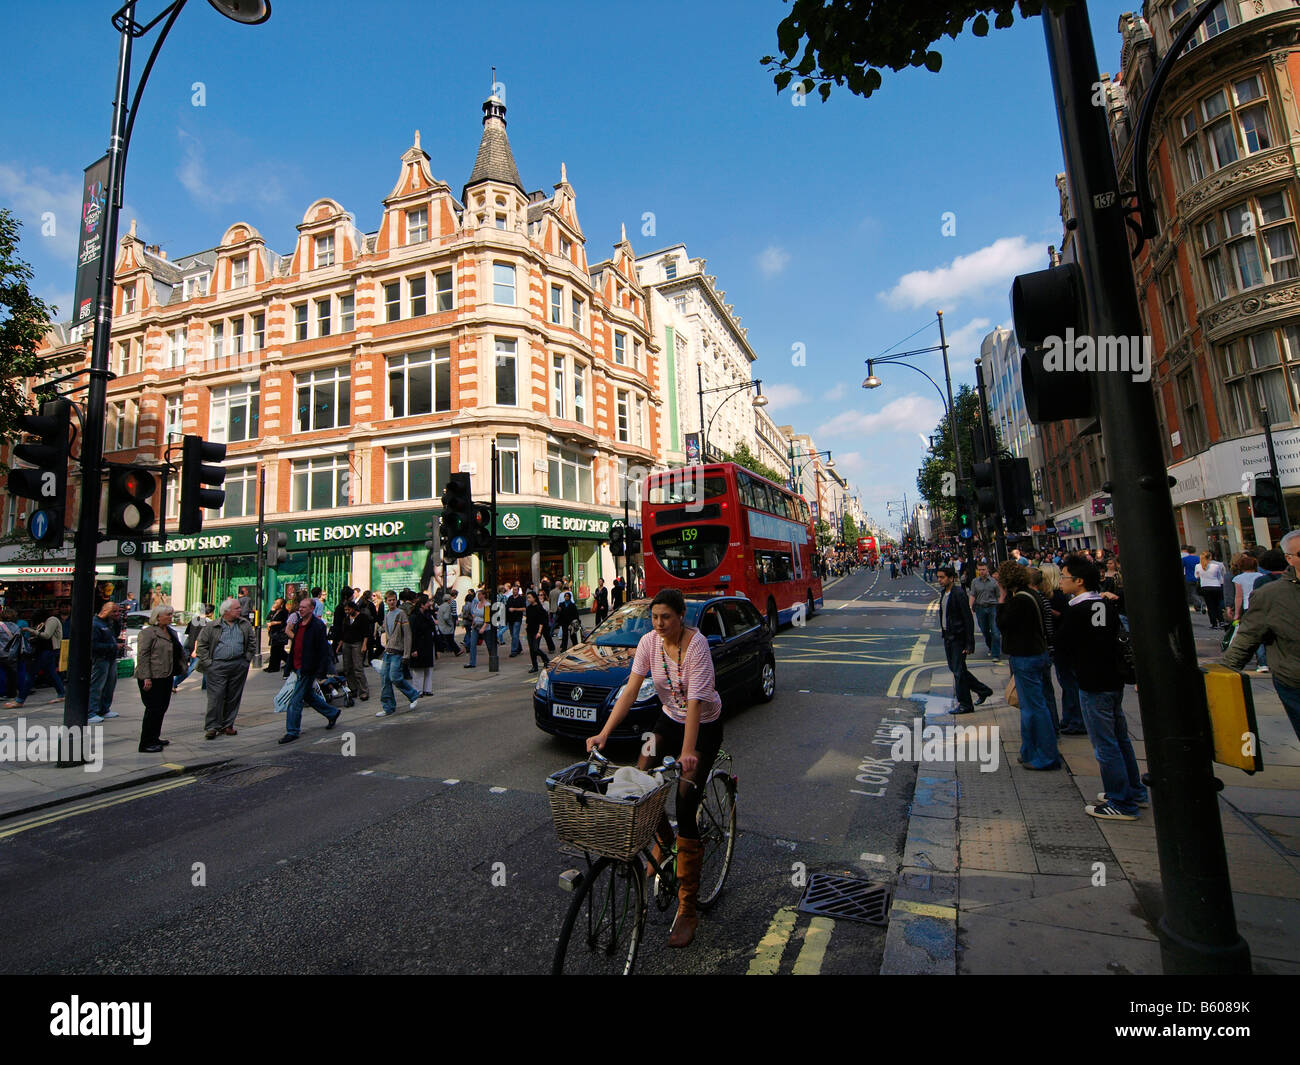 Oxford Street London UK with Body Shop store visible and woman riding a bicycle Stock Photo